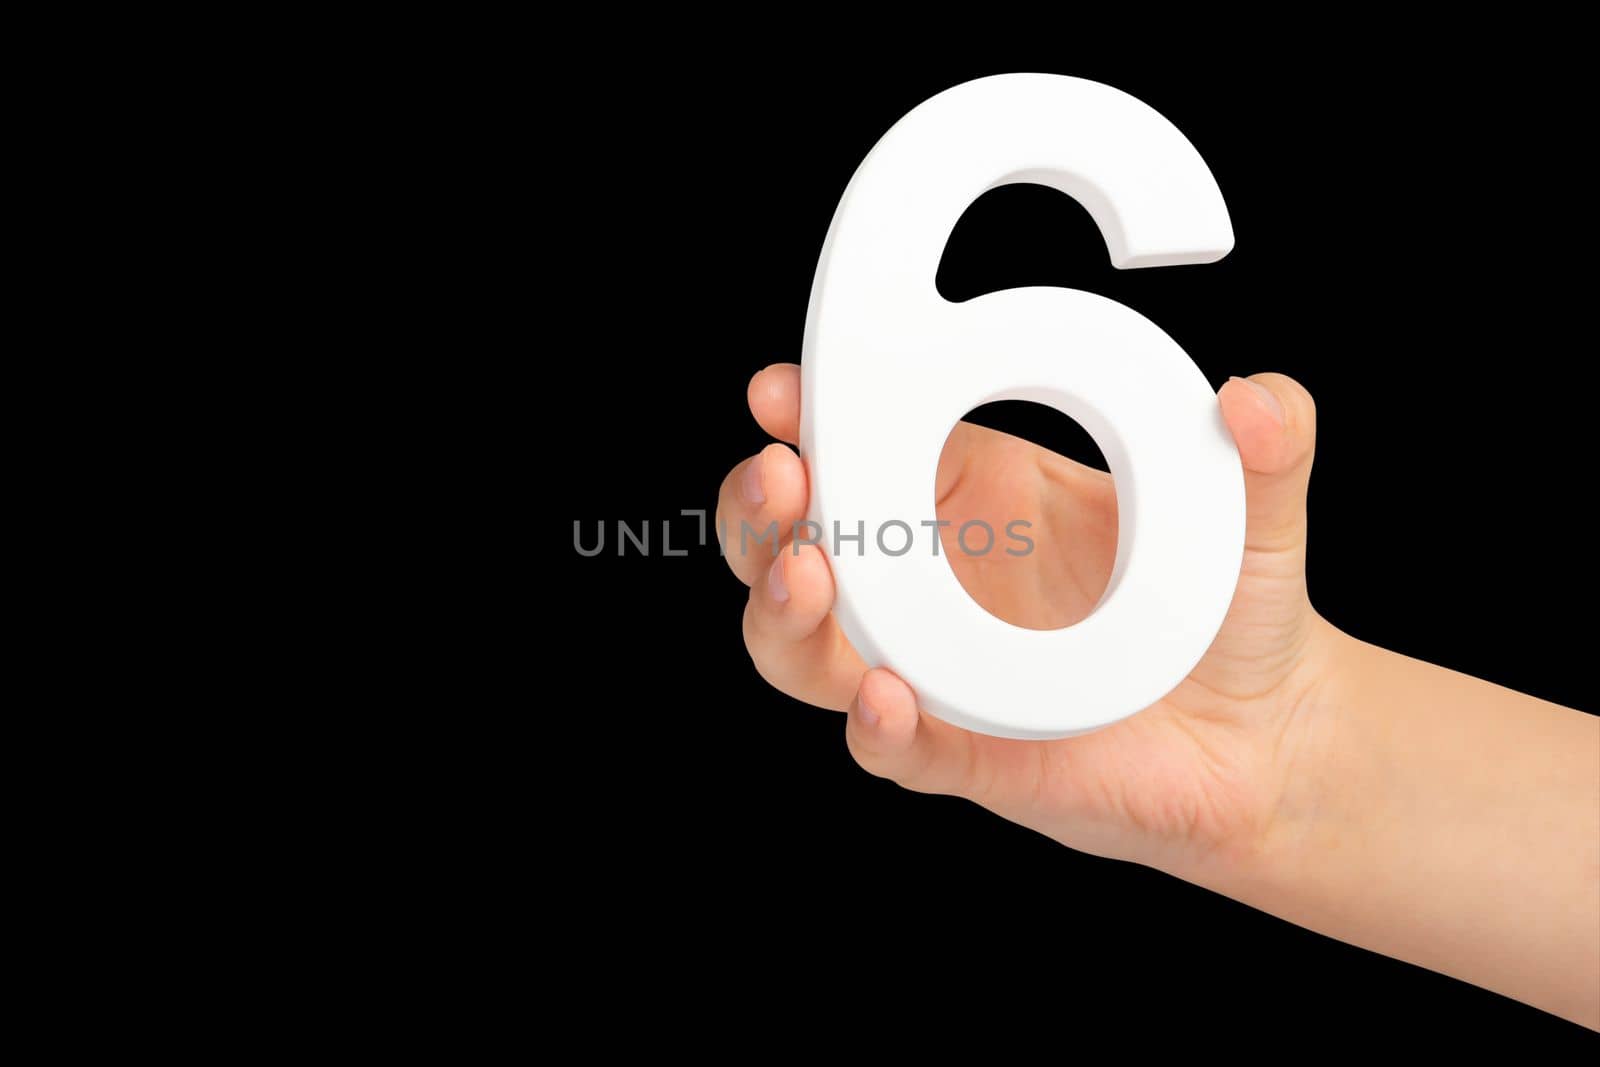 Number six in hand isolated on black background. Number six in a child's hand holding on a black background. To be inserted into a project or design